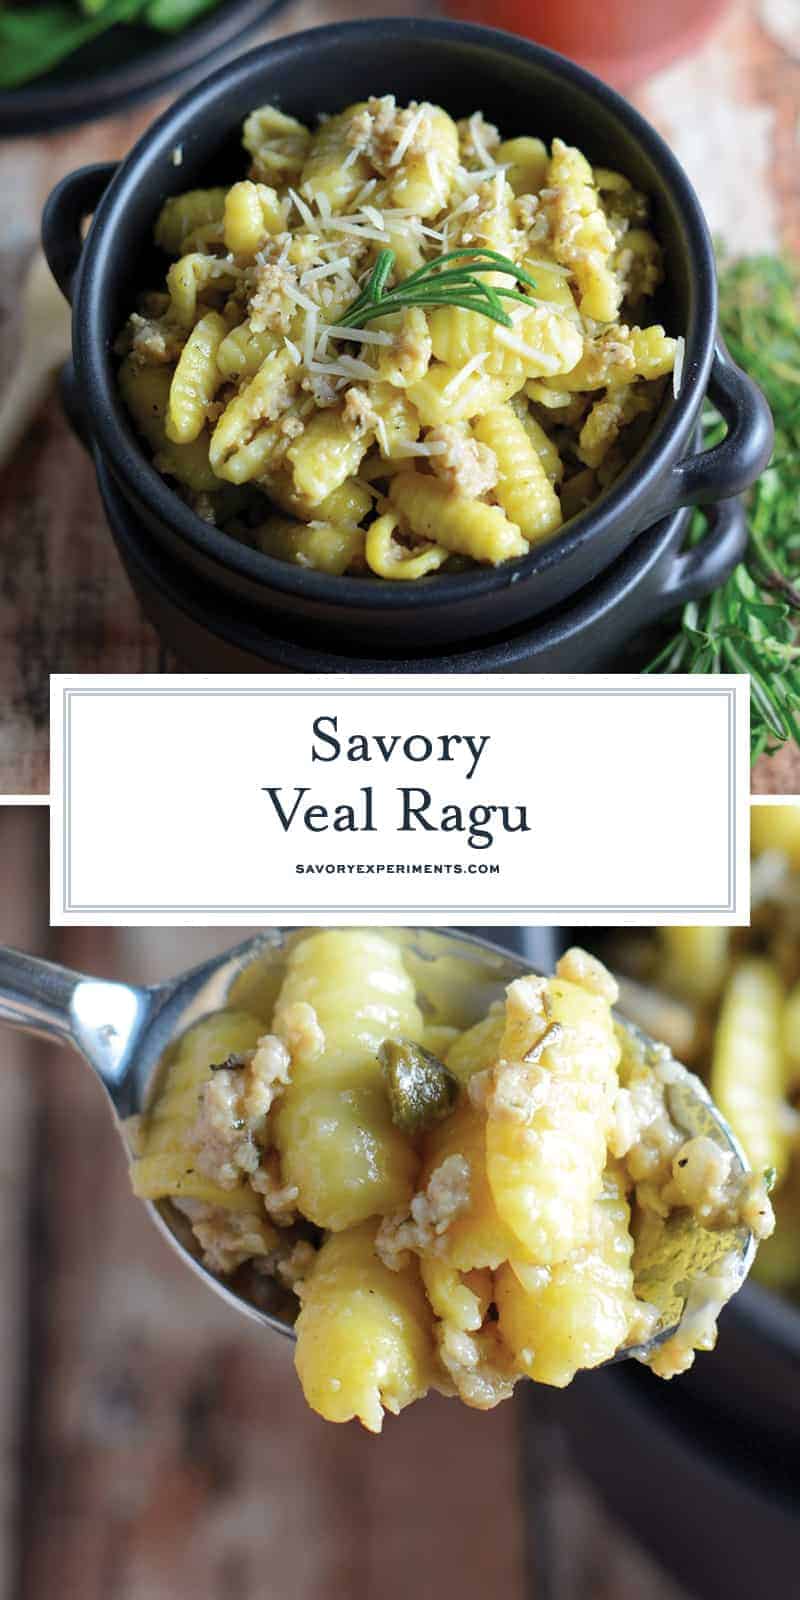 Veal Ragu simmers tender ground veal with garlic, onion, olive oil, capers and aromatic spices for the perfect comfort food. #homemaderagu #vealrecipes #vealragu www.savoryexperiments.com 